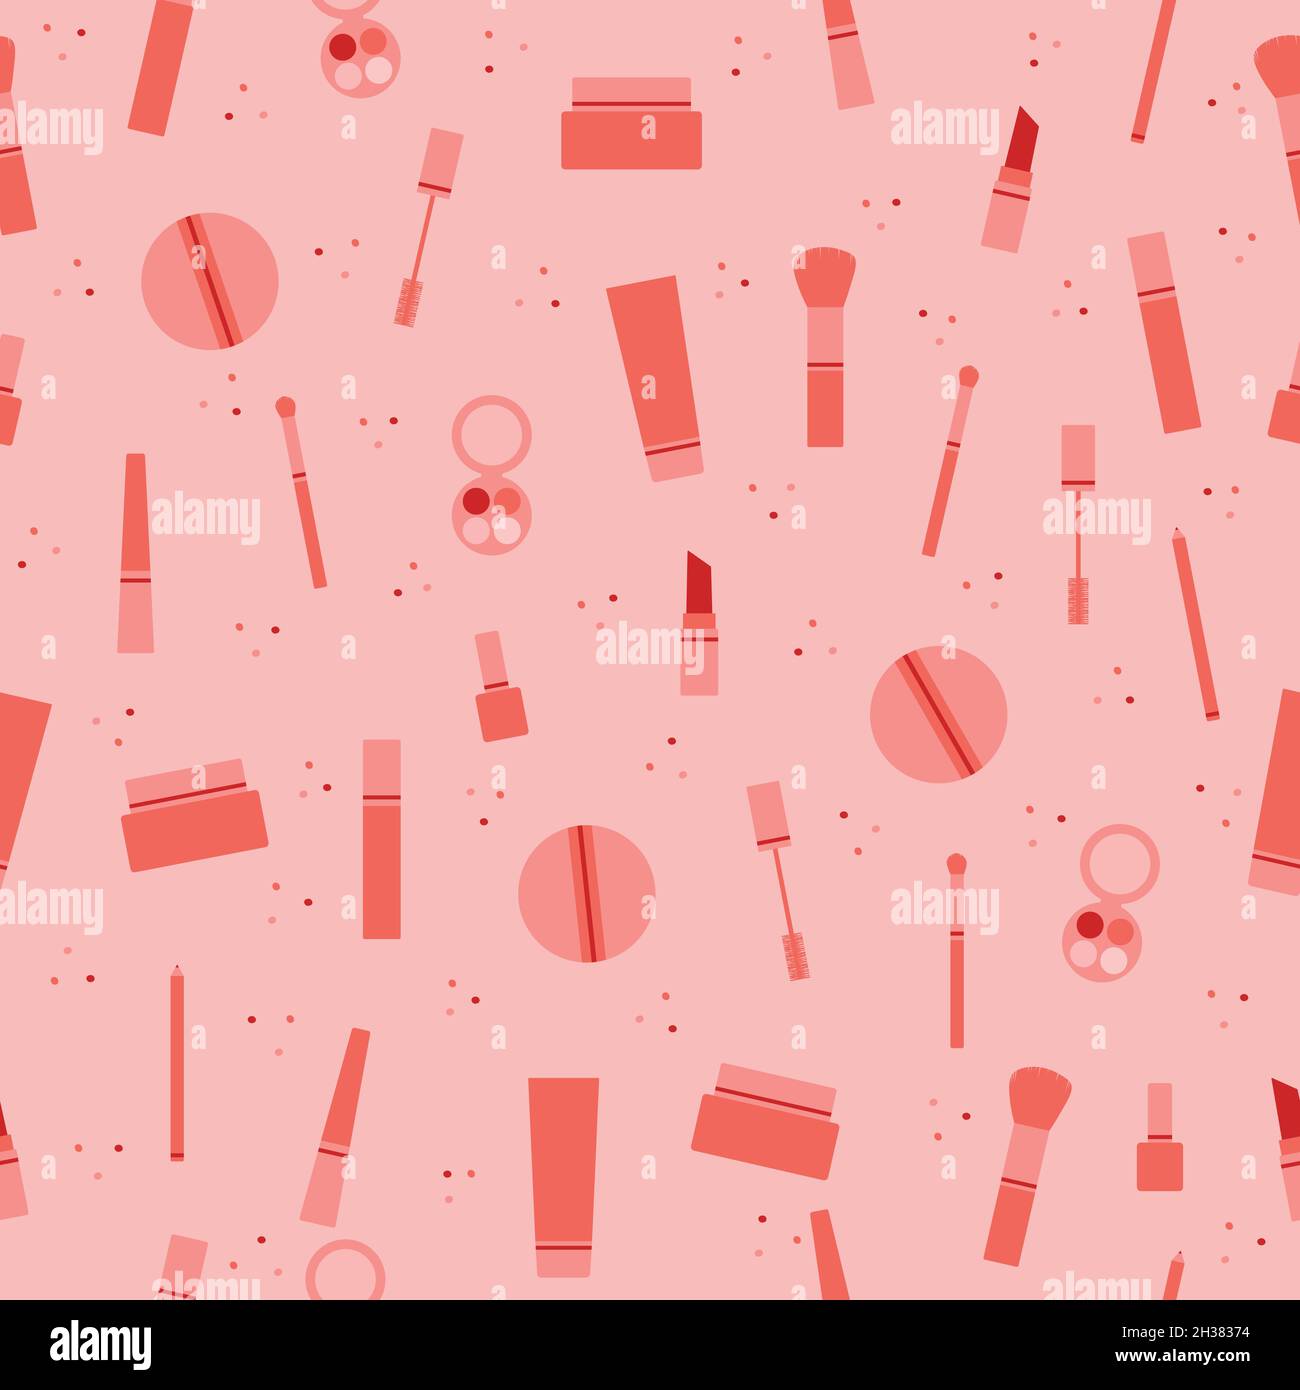 Vector seamless pattern full of makeup items. Makeup with lipstick, mascara, shadows, pencils and brushes in pink and red colors Stock Vector